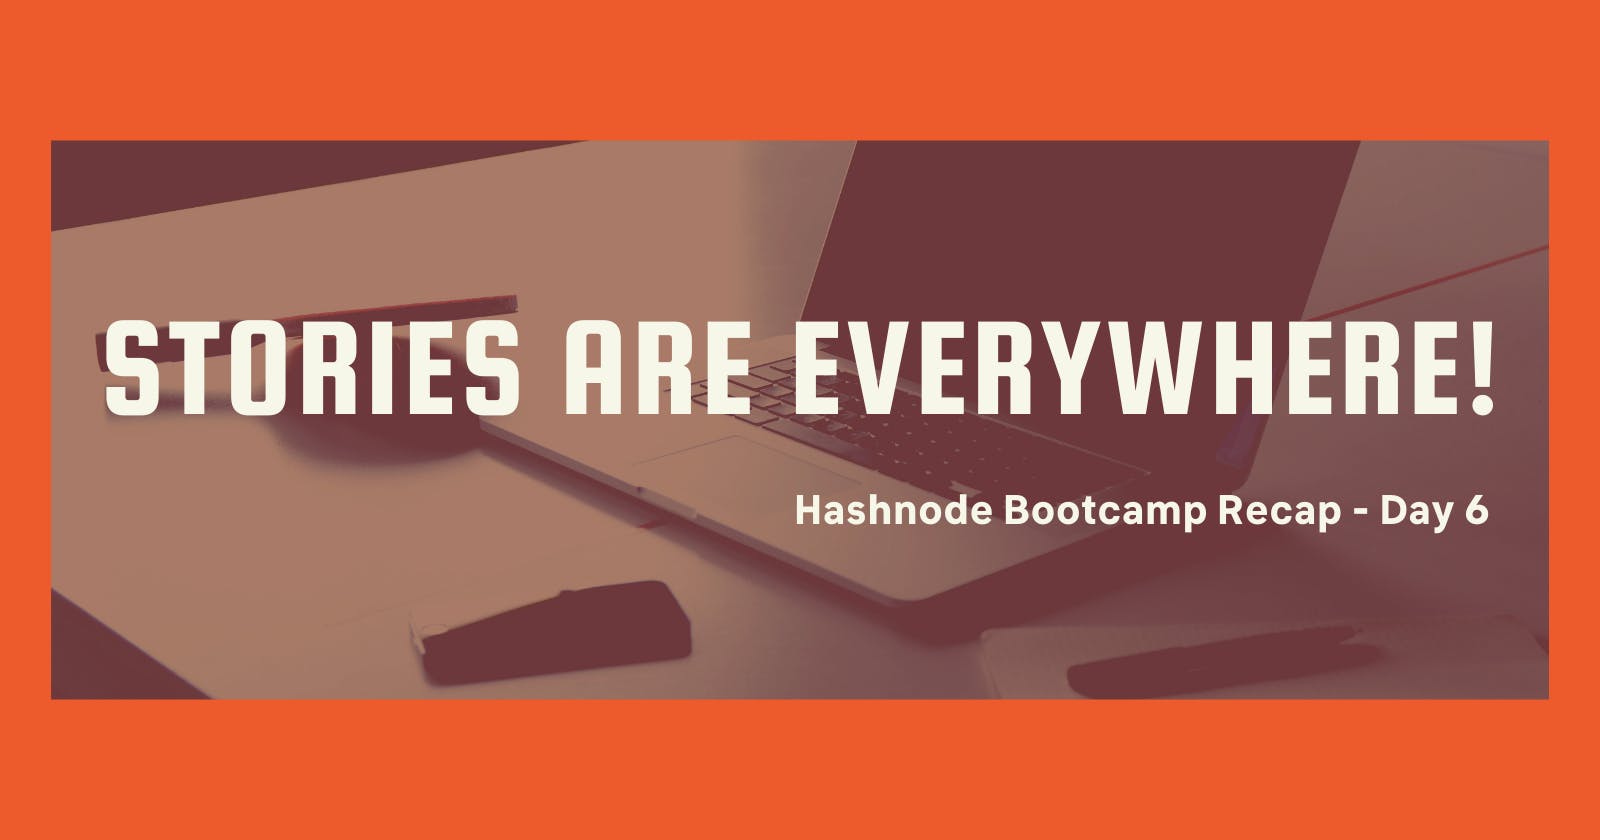 Hashnode Bootcamp: Stories Are Everywhere!